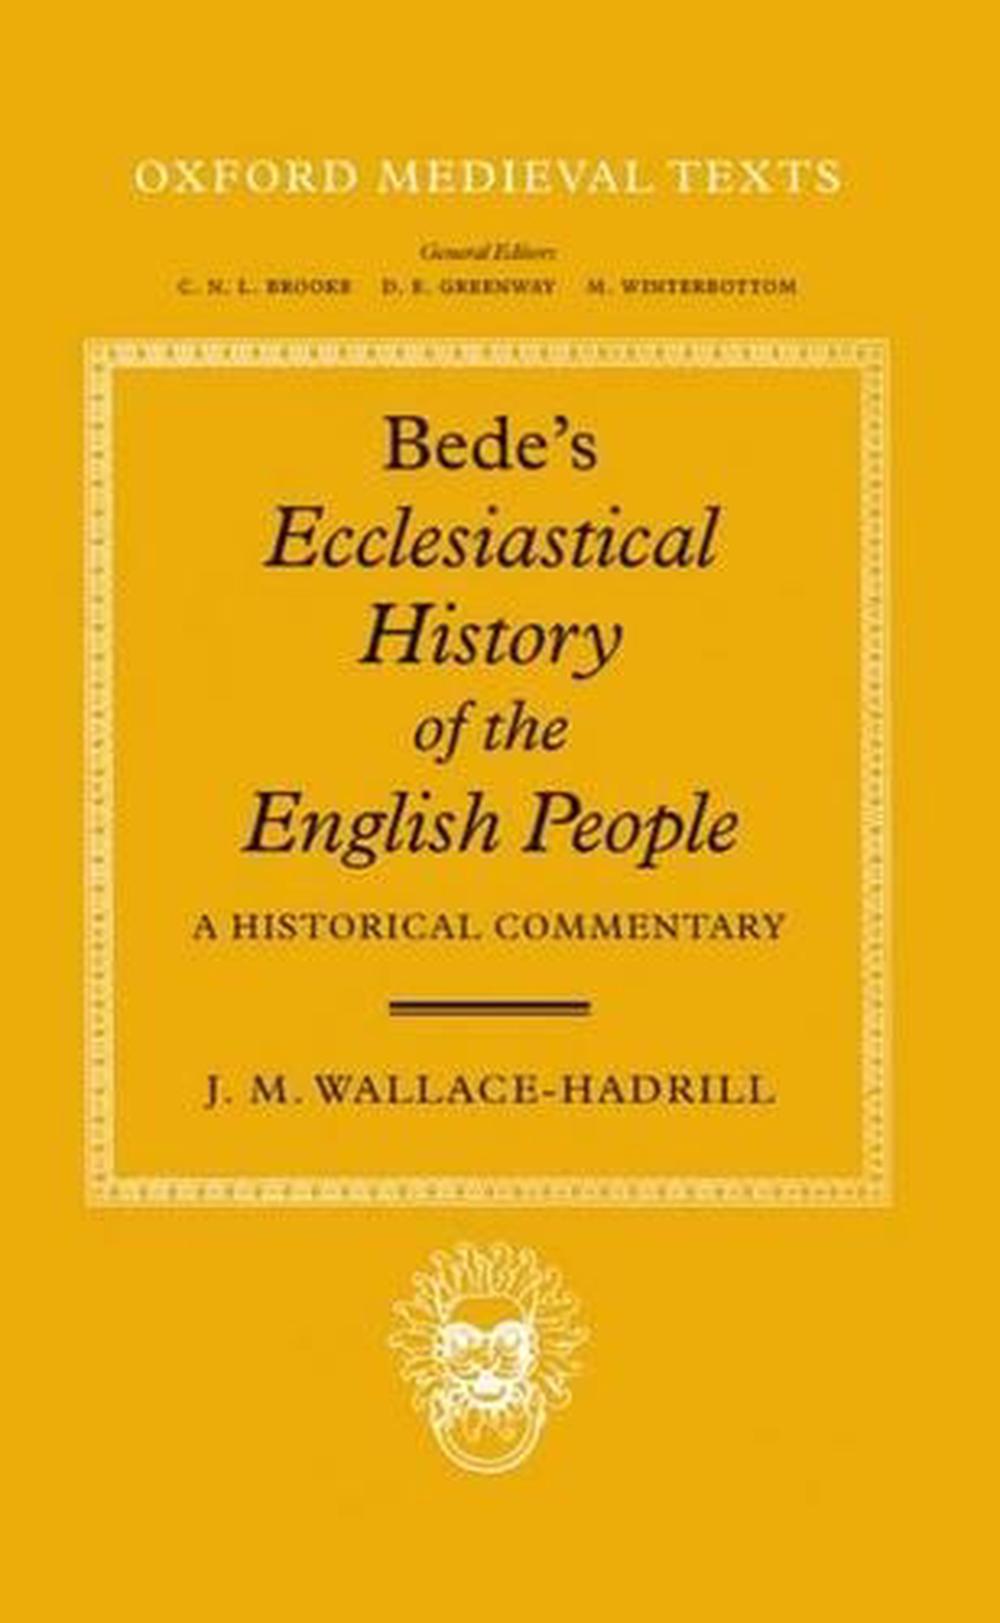 wrote ecclesiastical history of the english people